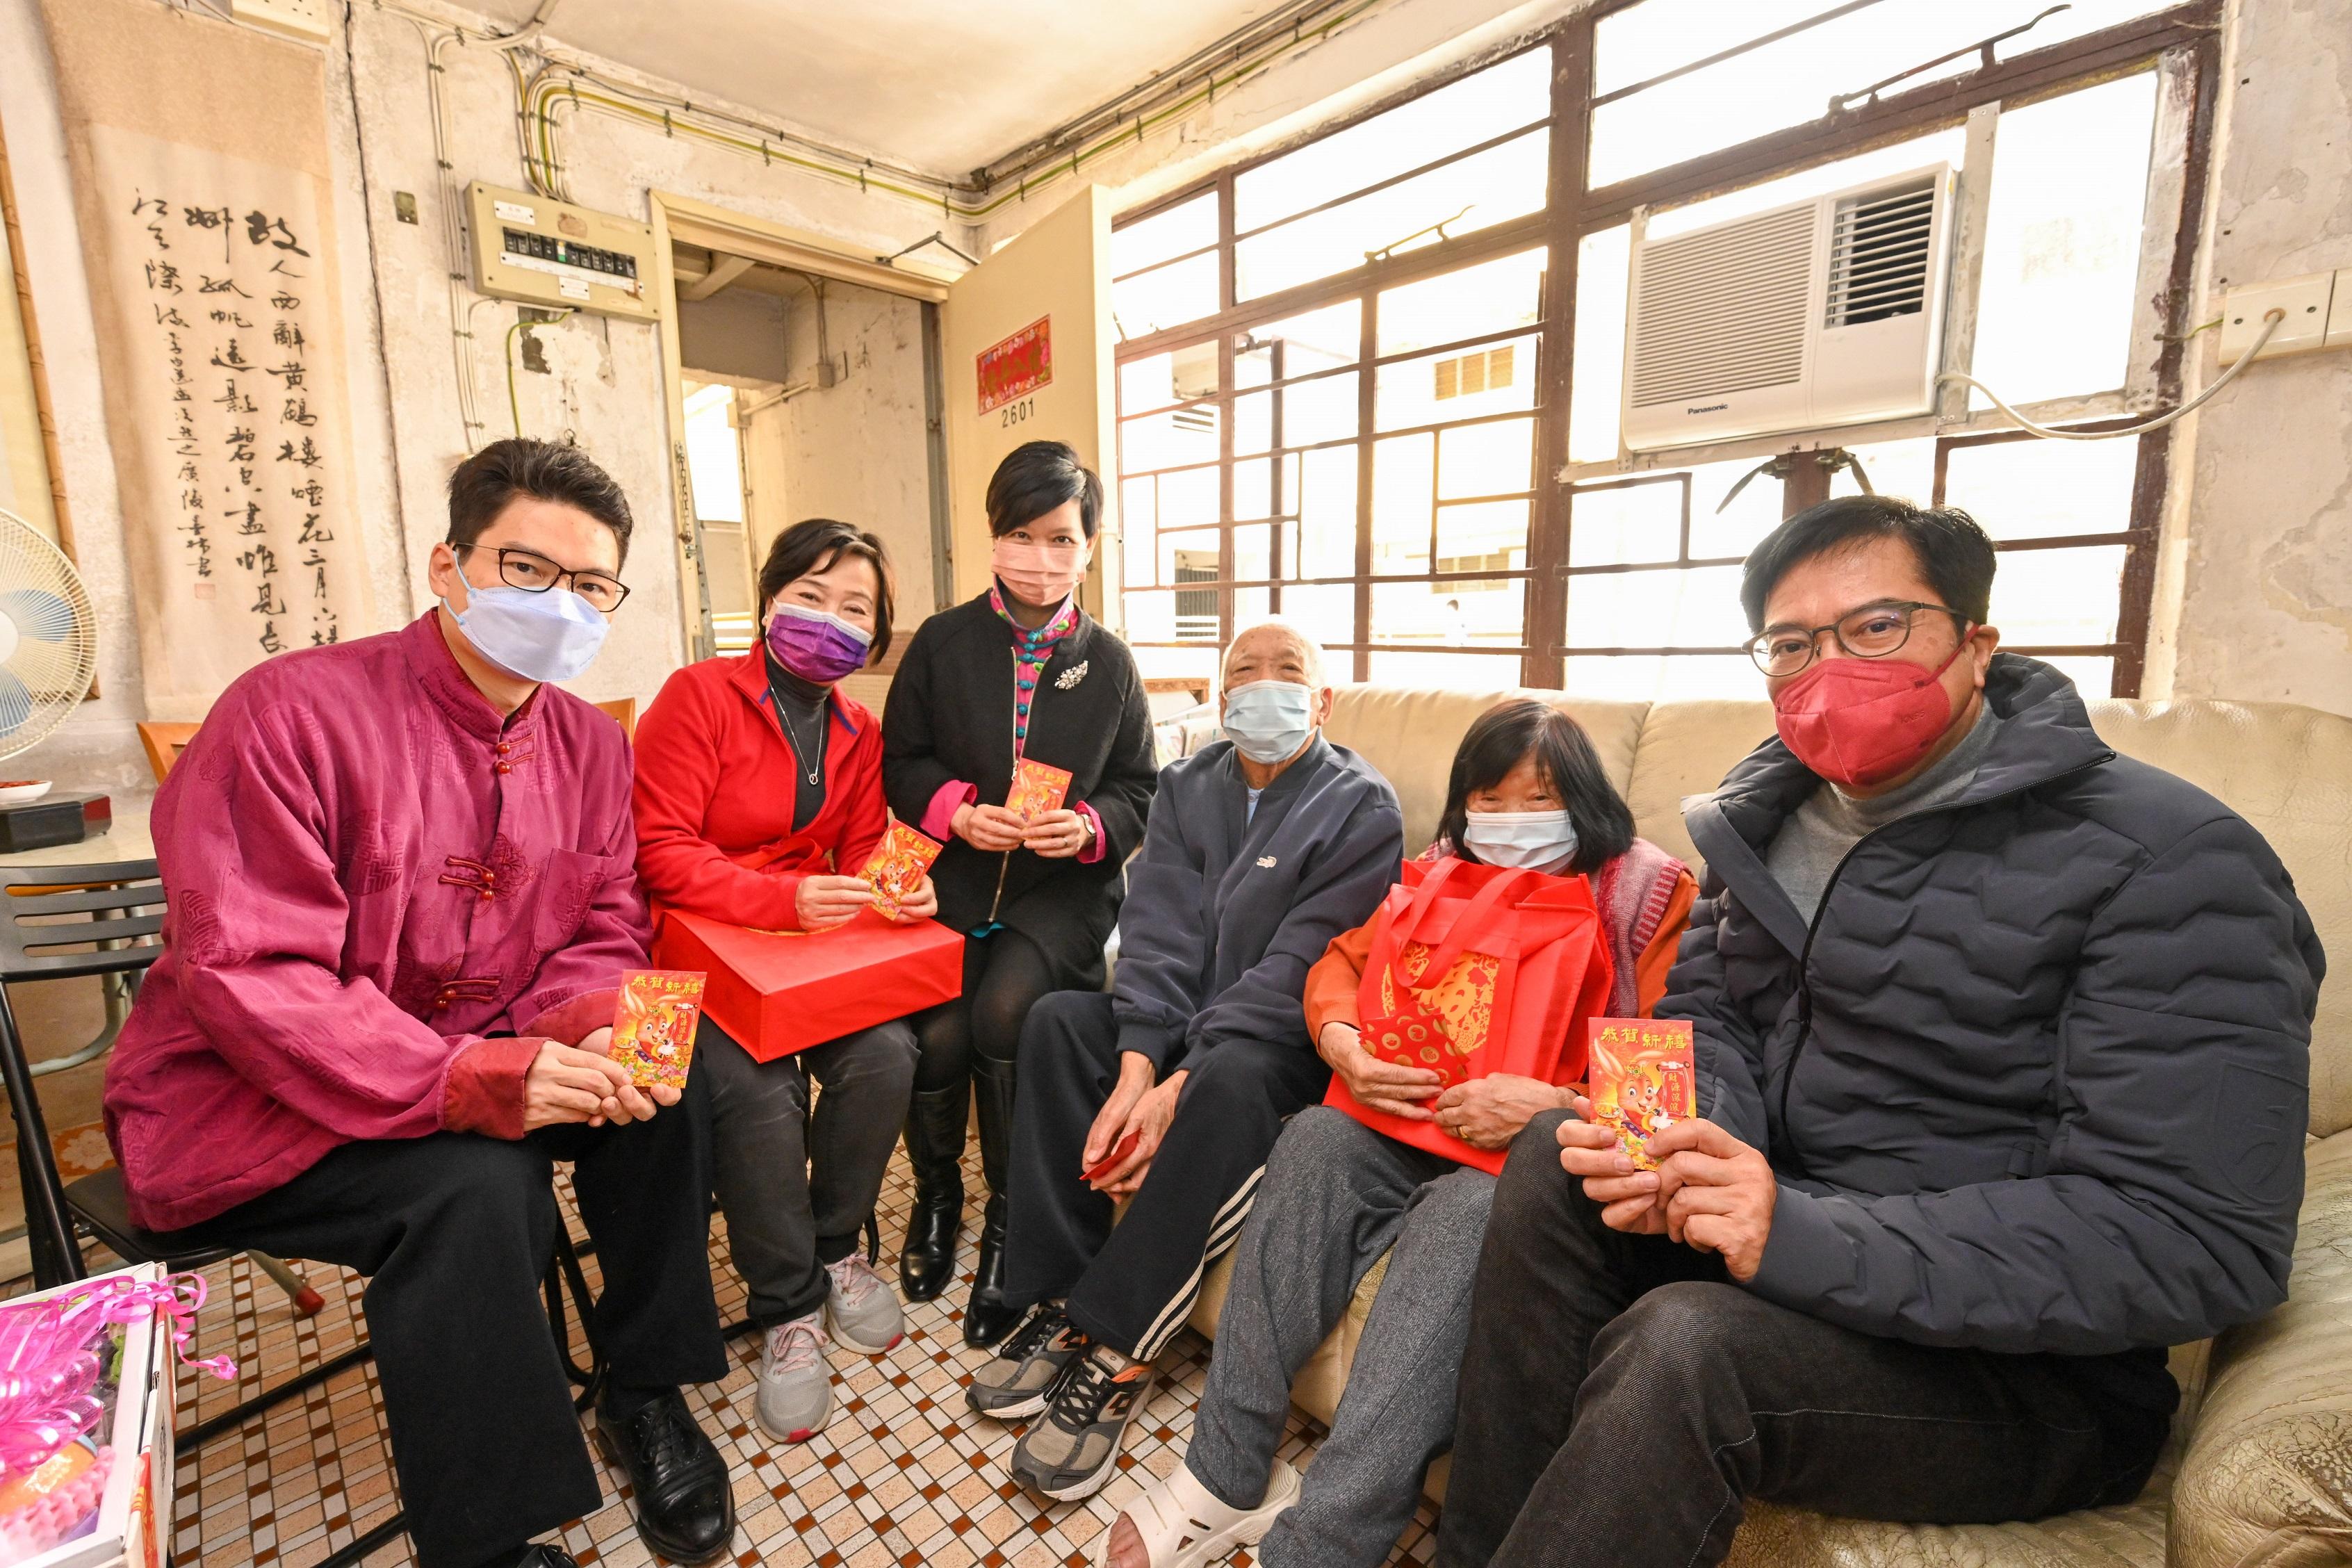 The Financial Secretary, Mr Paul Chan and the Deputy Financial Secretary, Mr Michael Wong together with a number of Principal Officials, visited grass-roots families in Tuen Mun District to distribute blessing bags and celebrate Chinese New Year with them today (January 22). Photo shows Mr Wong (first right), the Secretary for Housing, Ms Winnie Ho (third left); the Secretary for Education, Dr Choi Yuk-lin (second left); and Acting Secretary for Financial Services and the Treasury, Mr Joseph Chan (first left) visiting elderly doubletons living in Yau Oi Estate, Tuen Mun, to learn more about their daily life and needs. They also presented gifts to the seniors and extended seasonal greetings to them on behalf of the Government.